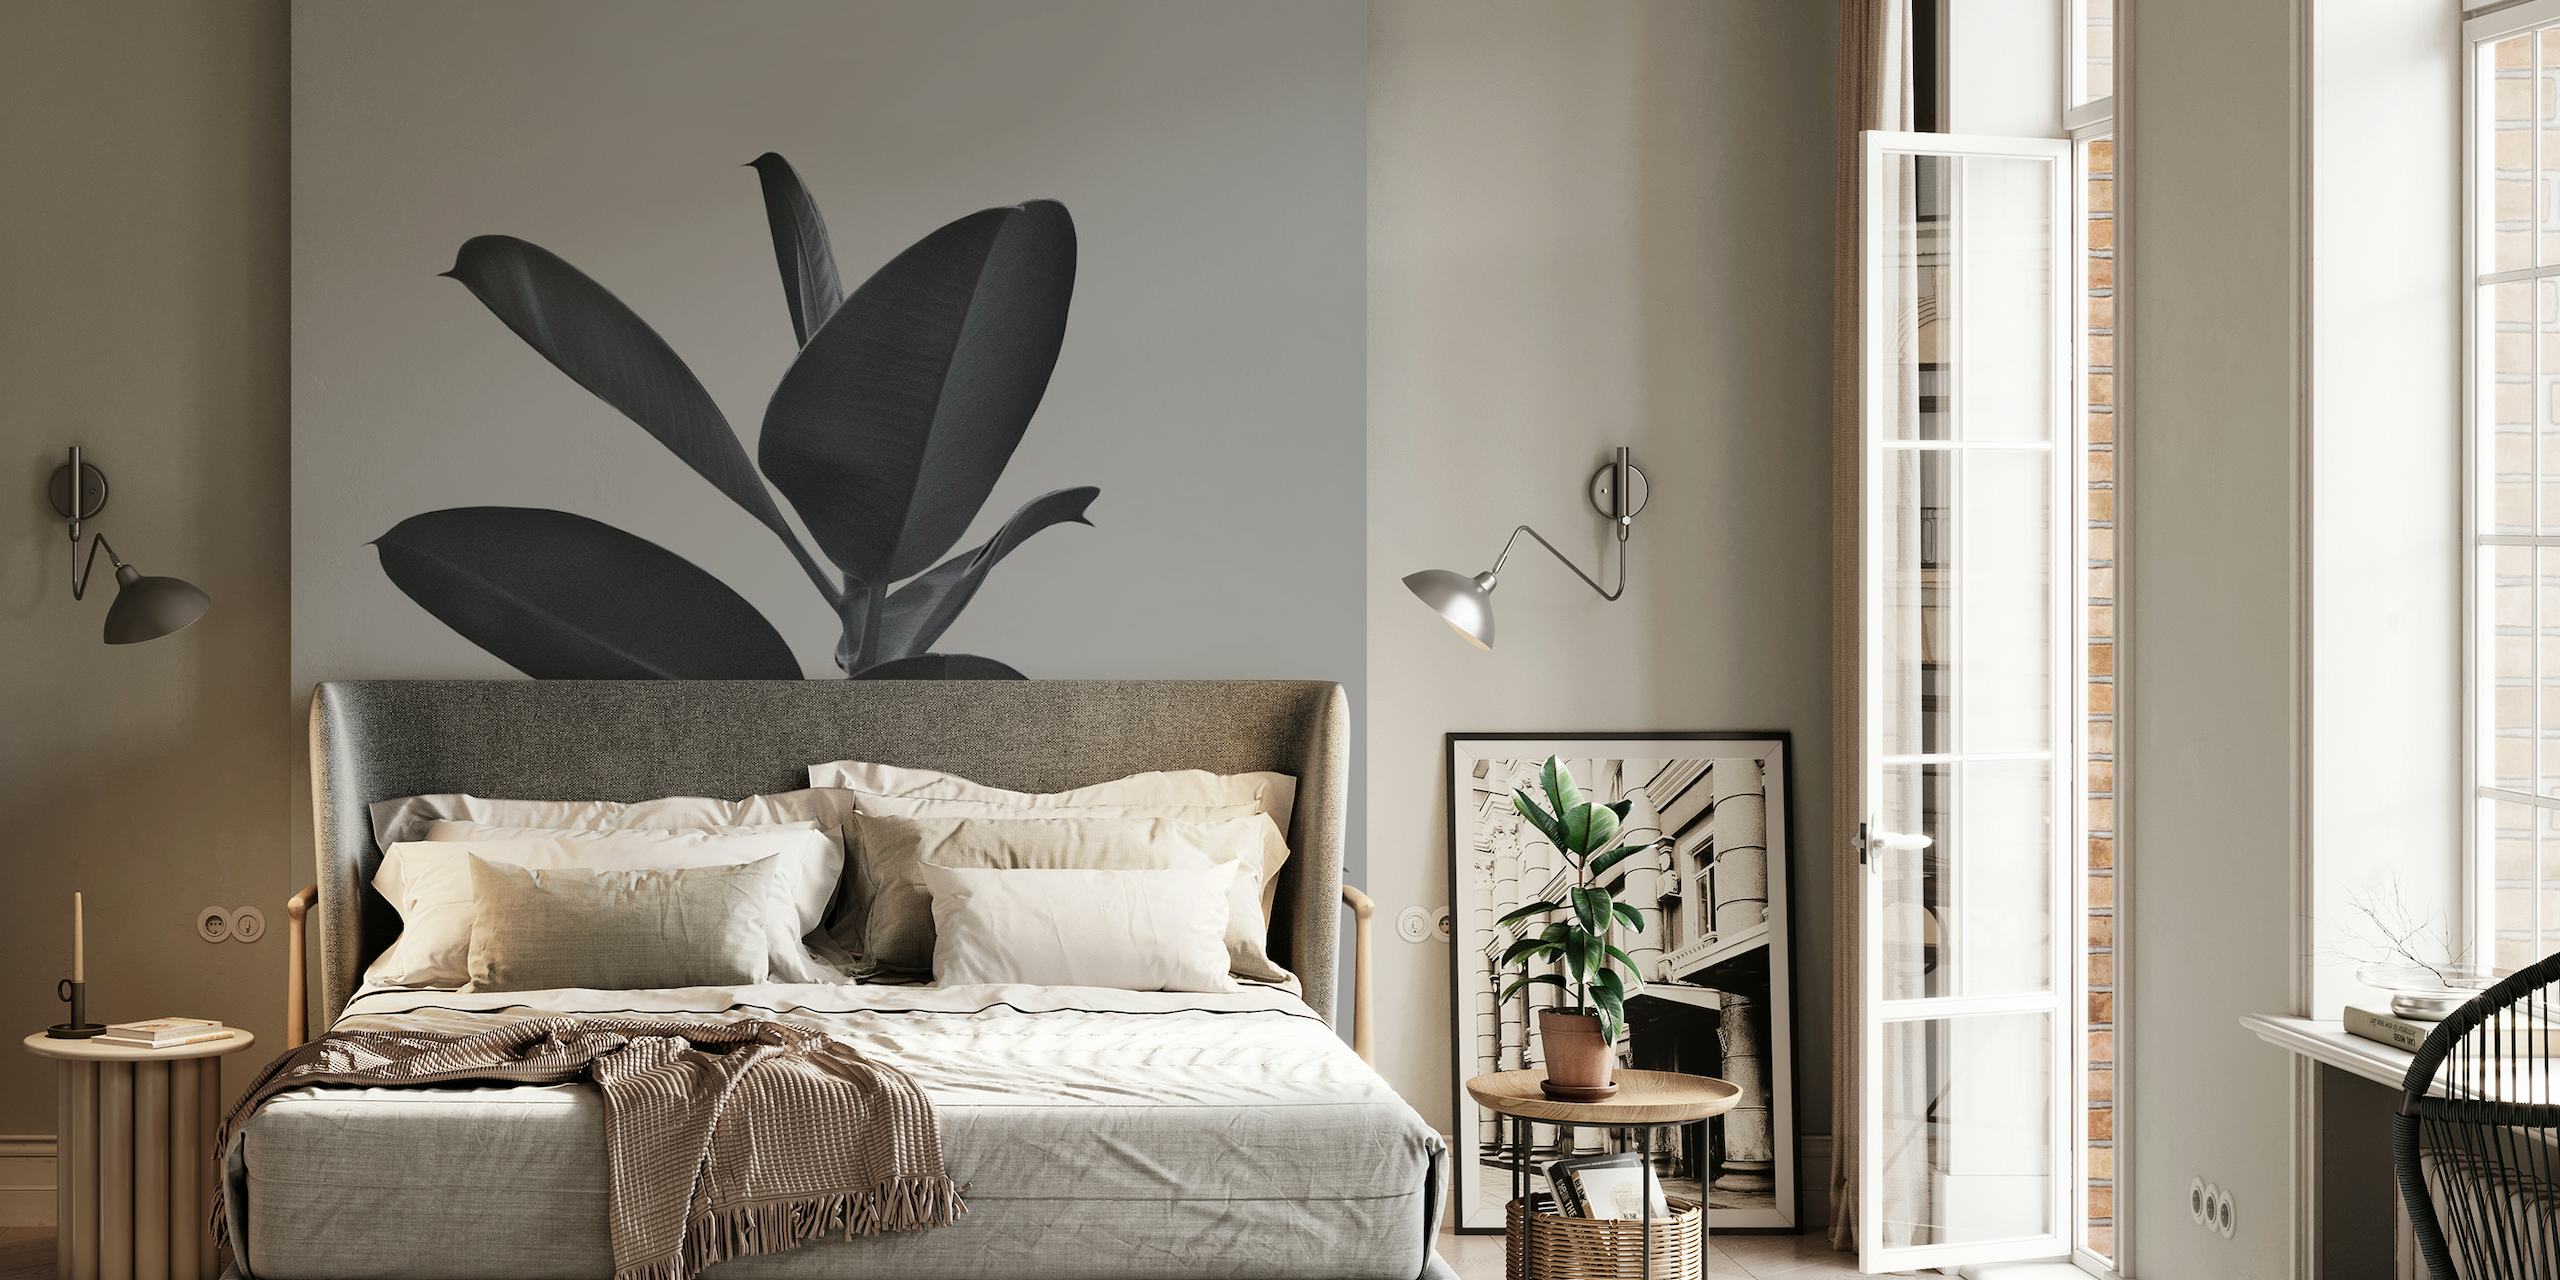 Monochrome wall mural of a Ficus plant